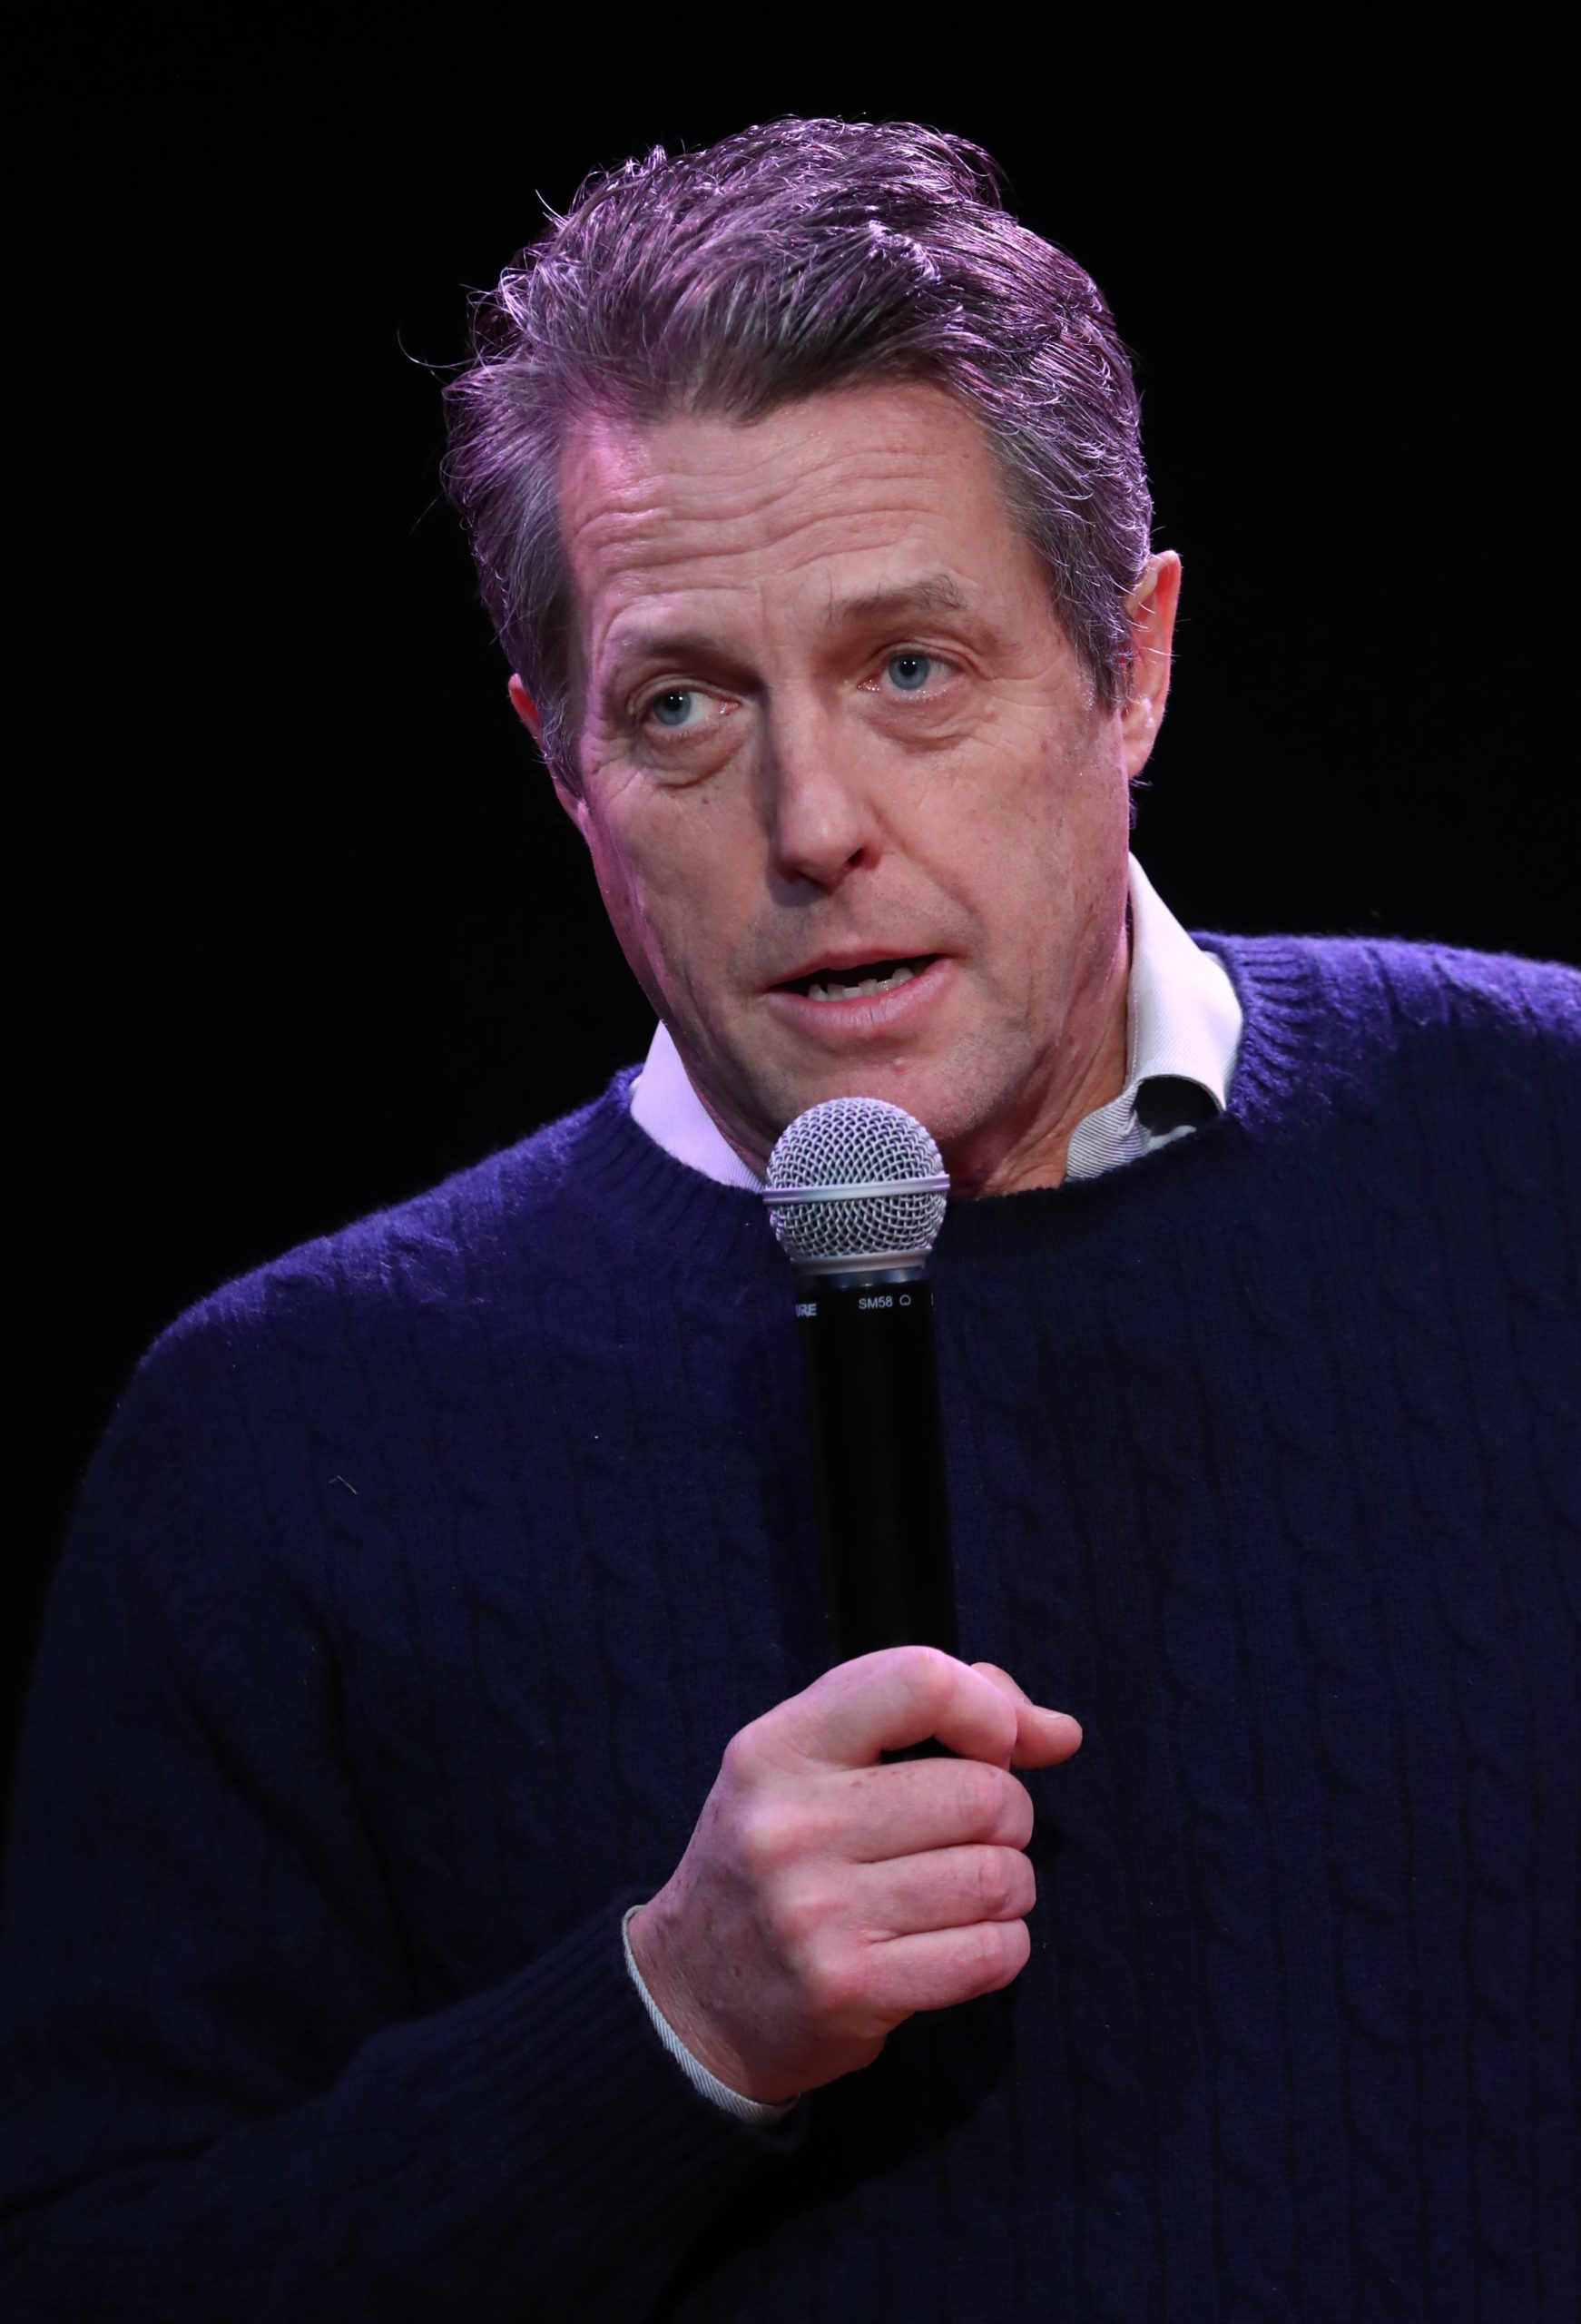 Charity founder praises Hugh Grant after actor’s latest generous donation